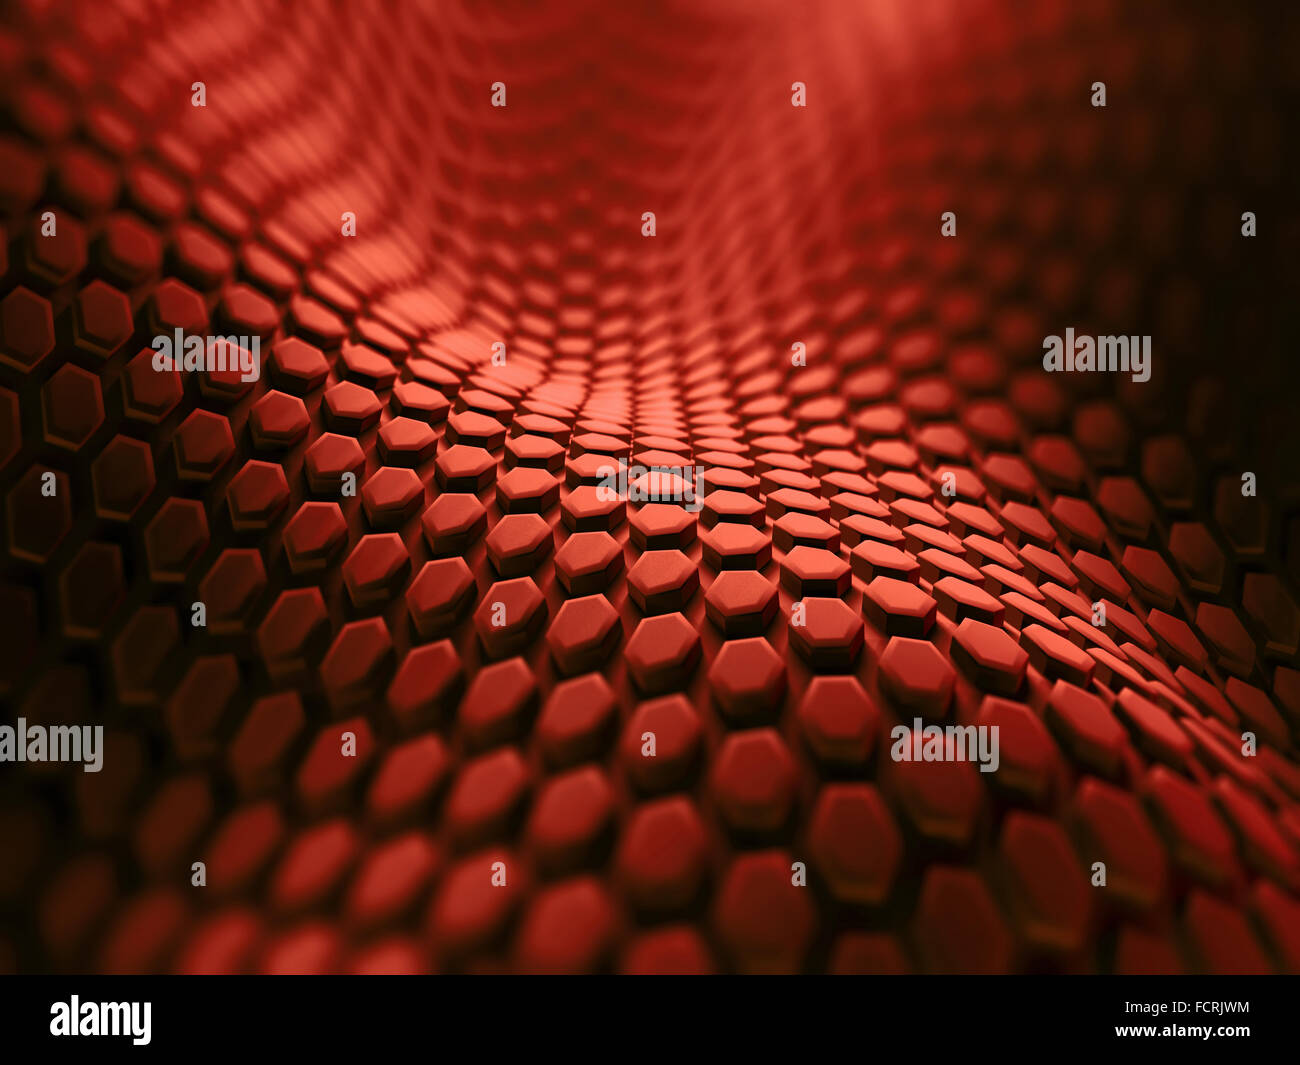 Abstract background with hexagonal shapes in red. Stock Photo